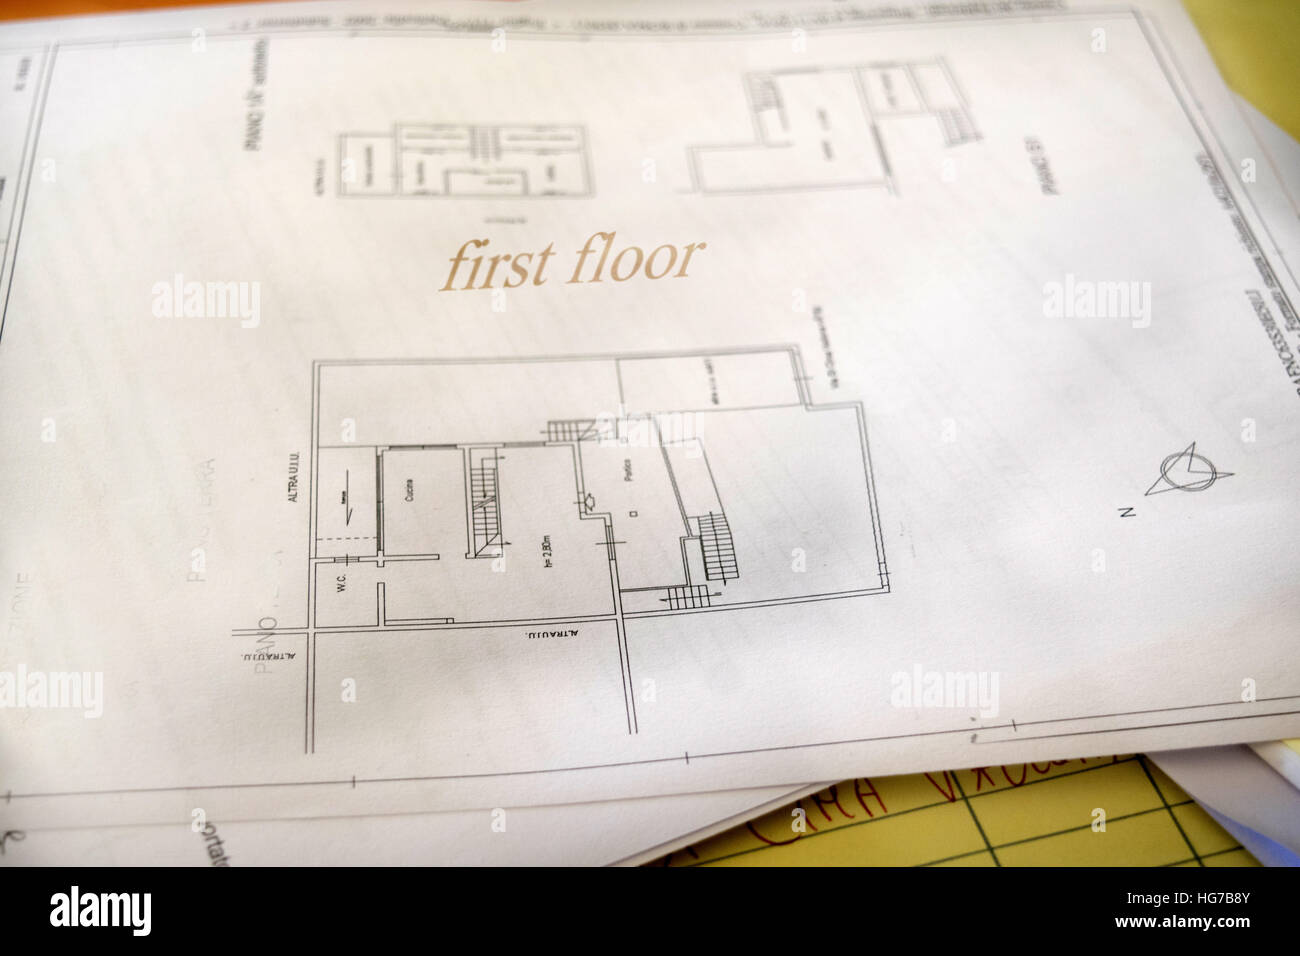 Drawings for building Architectural project Stock Photo